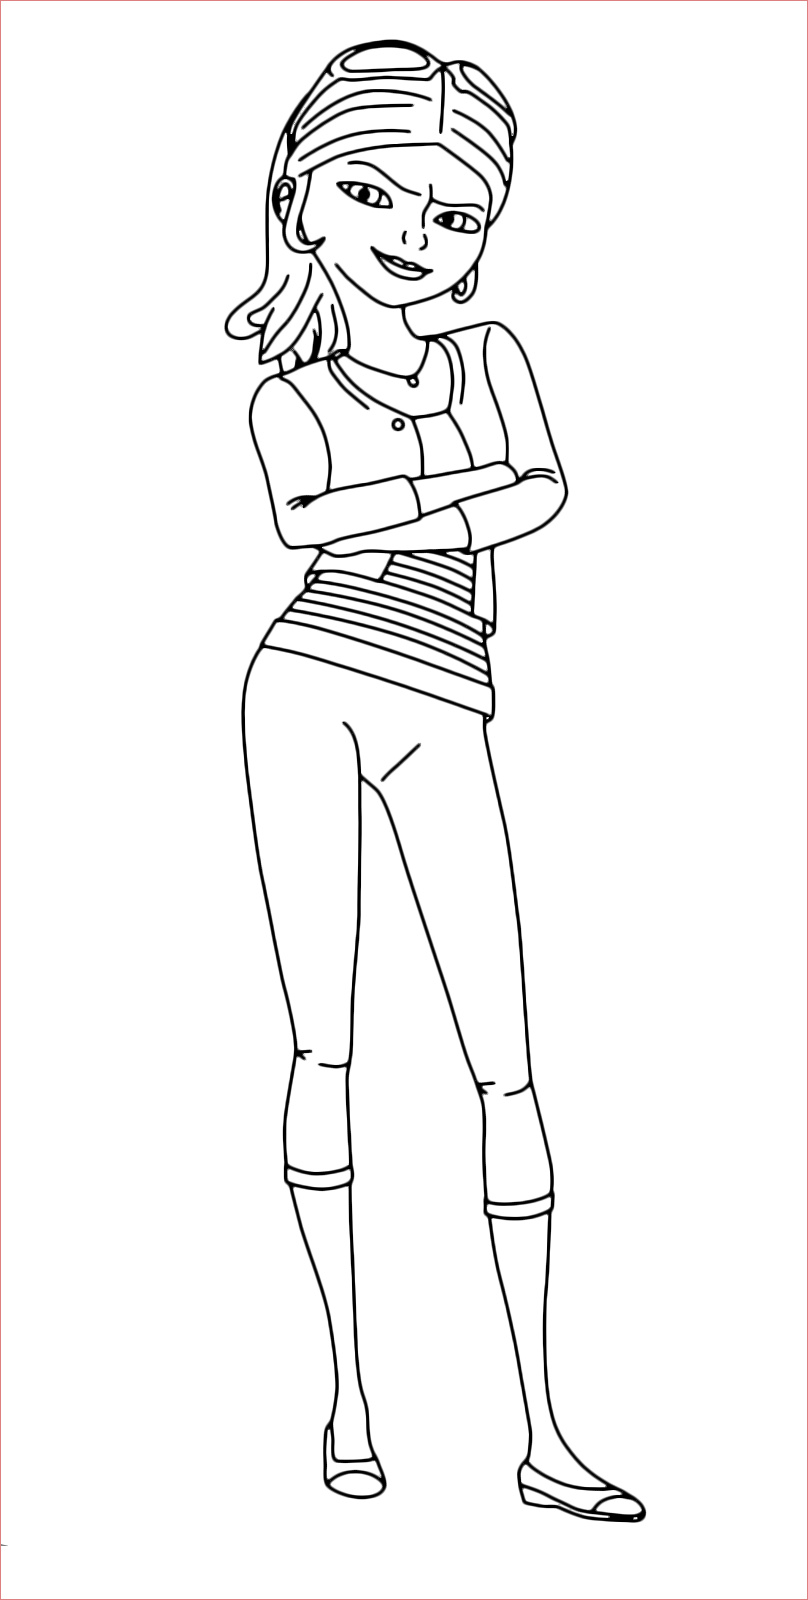 marinette miraculous coloring pages